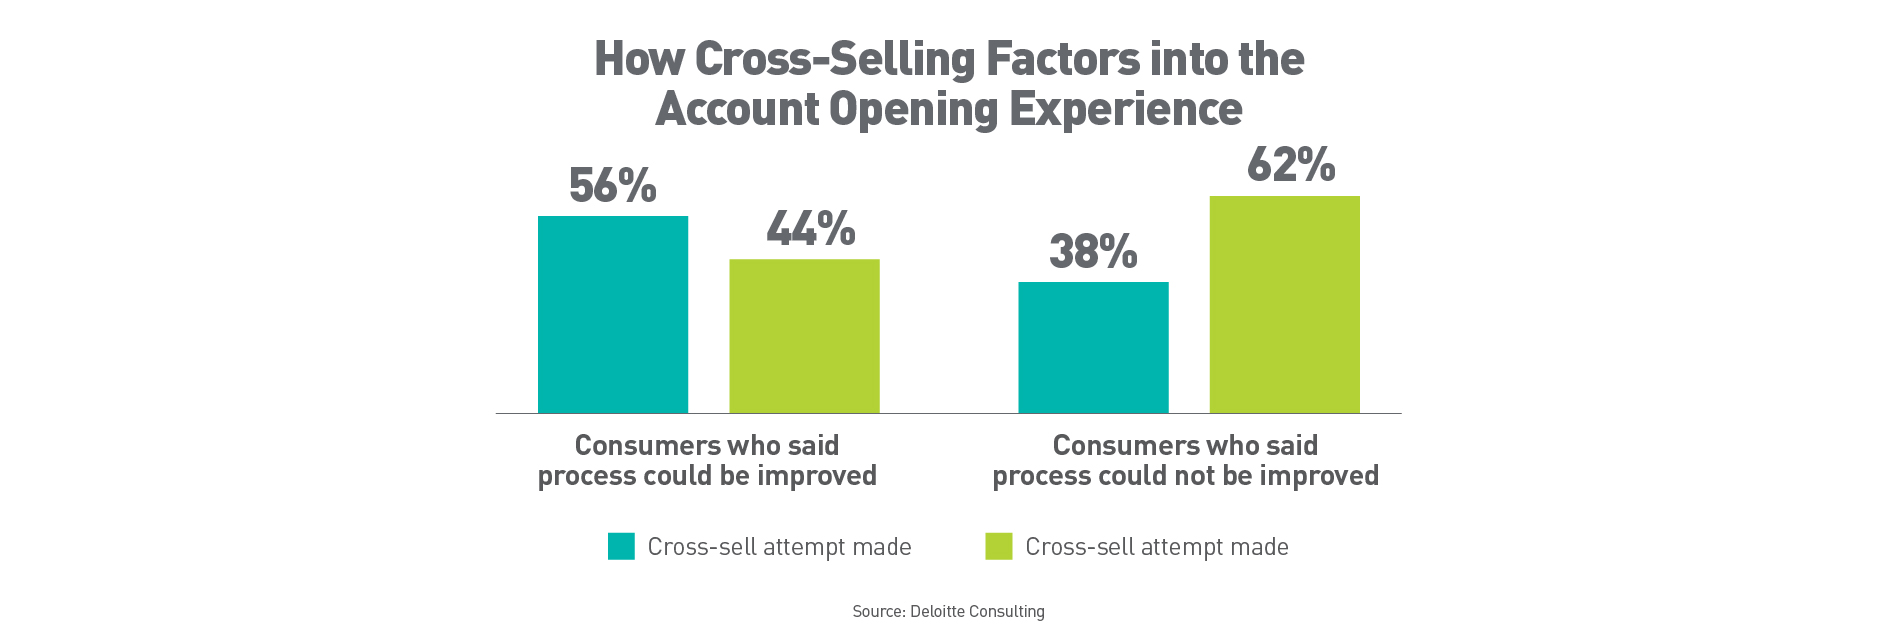 How Cross-Selling Factors into the Account Opening Experience